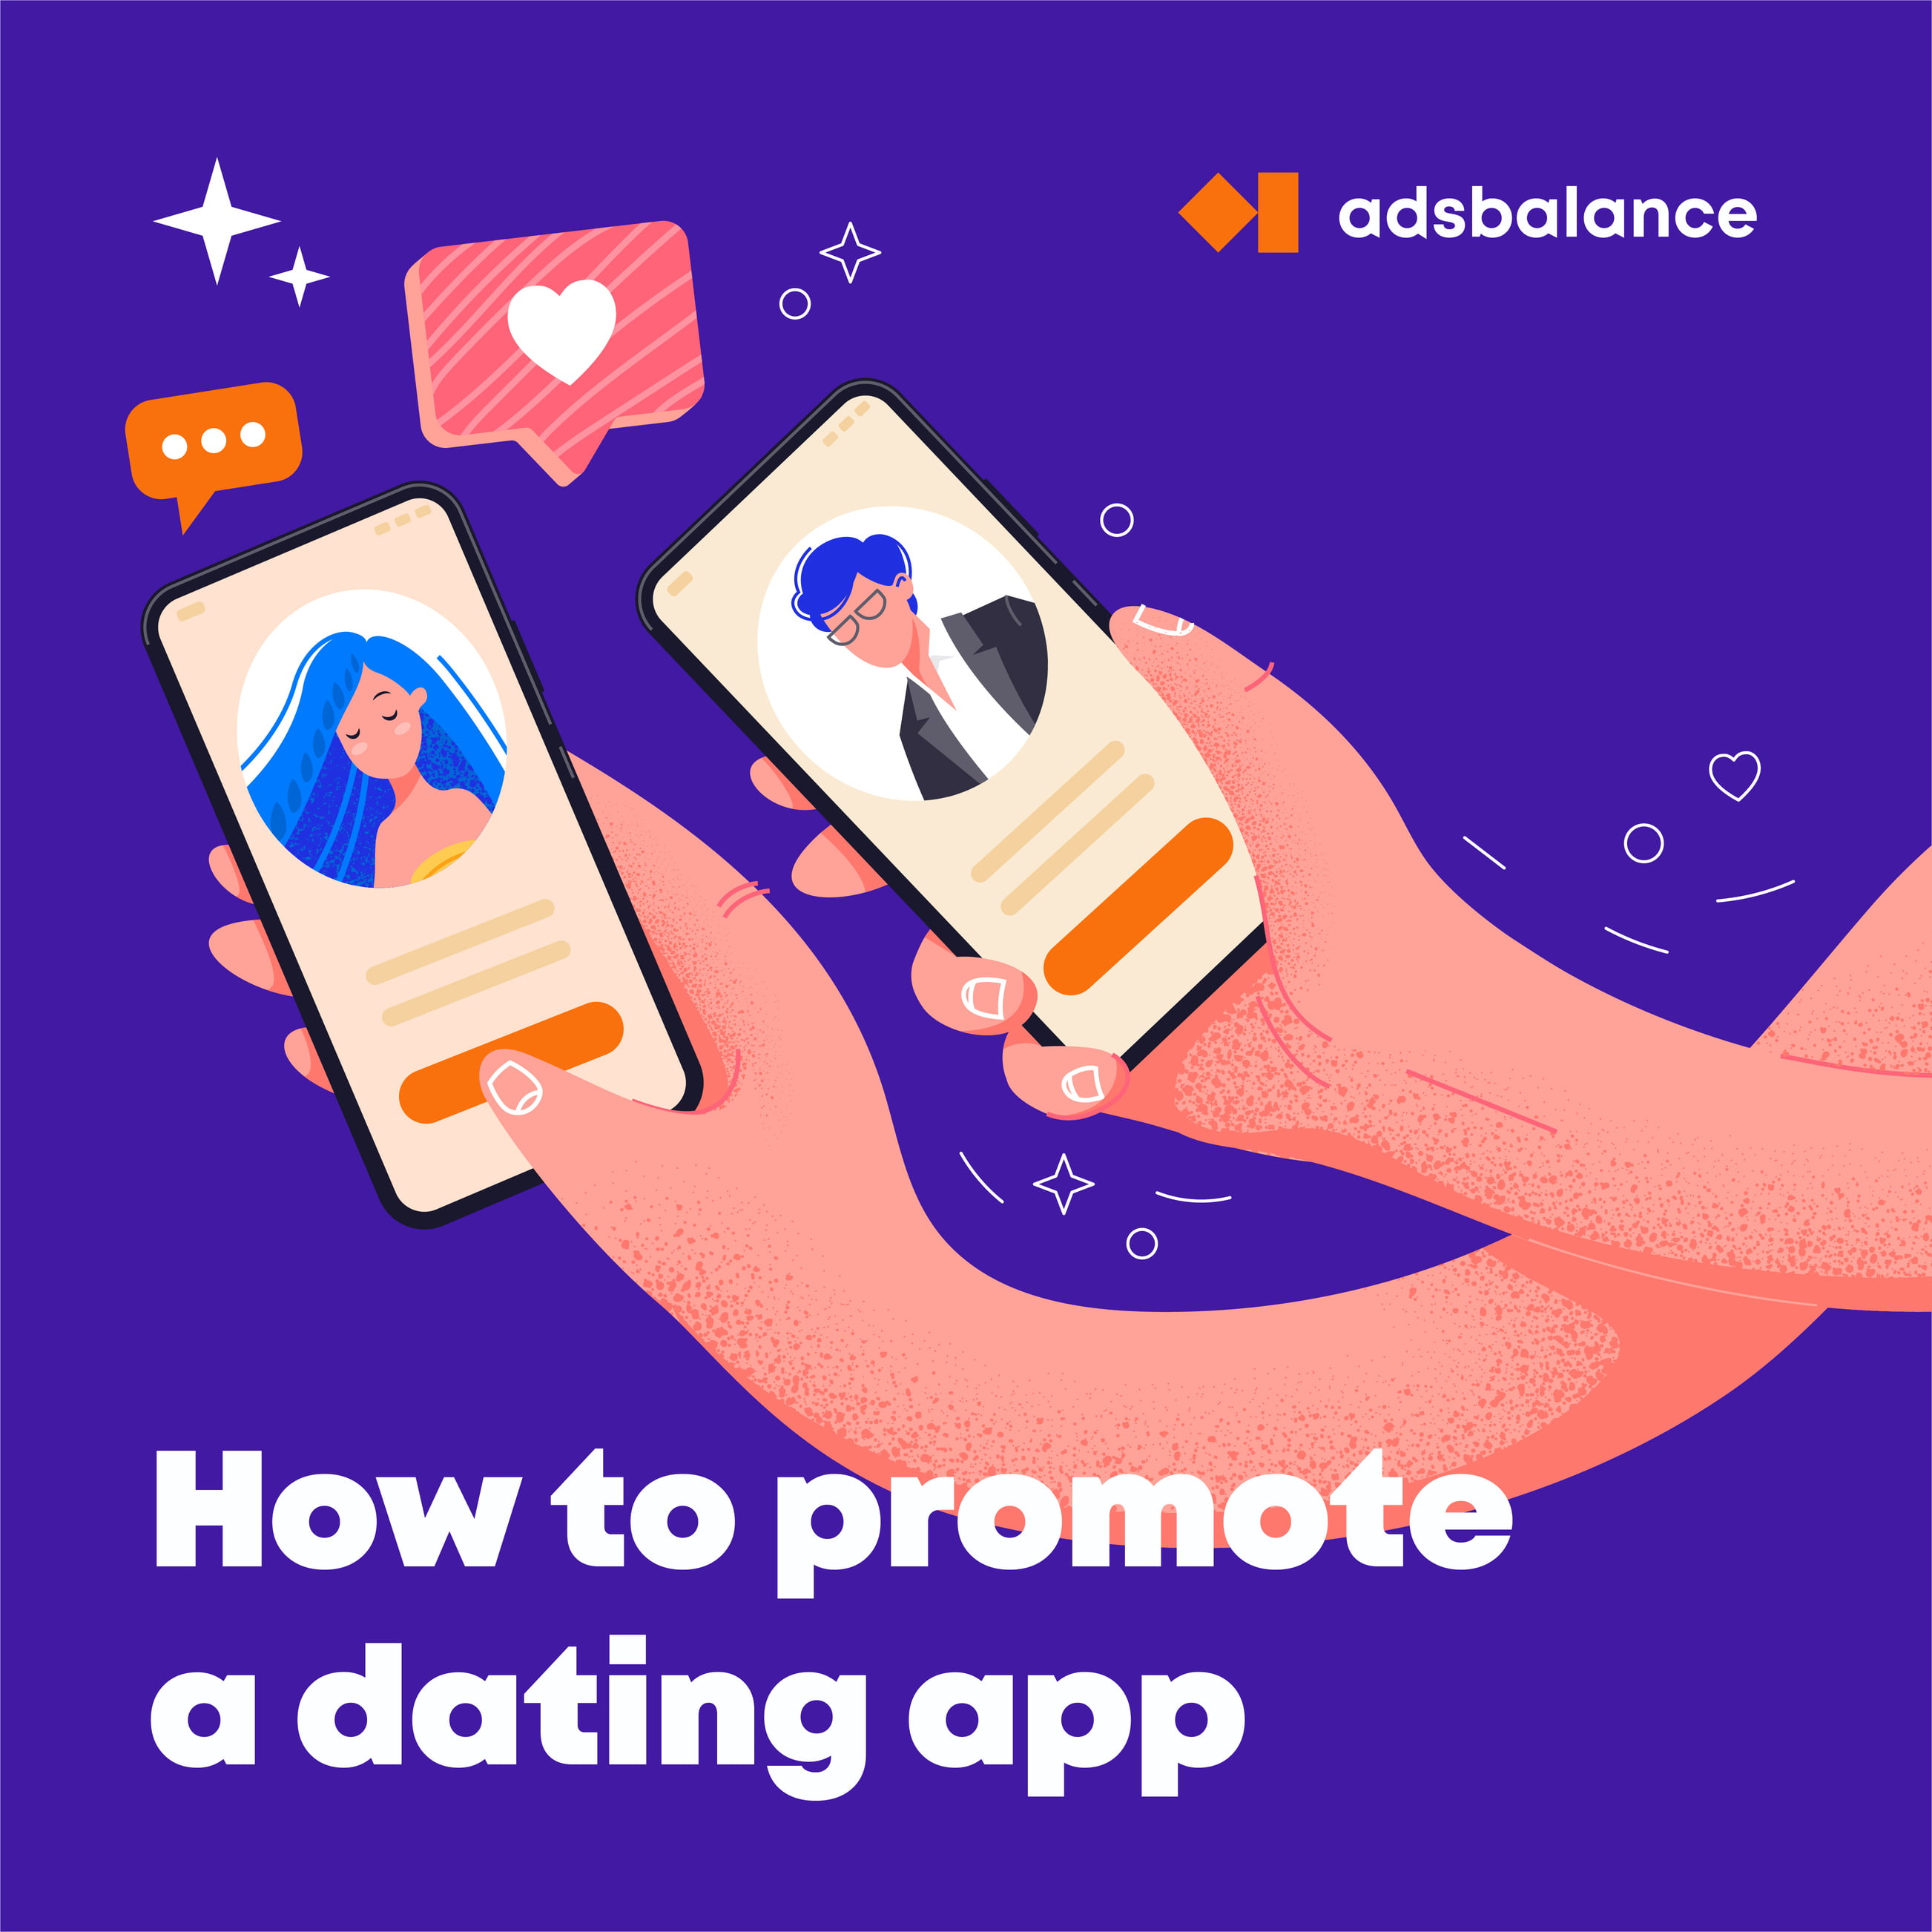 How to market a dating app?